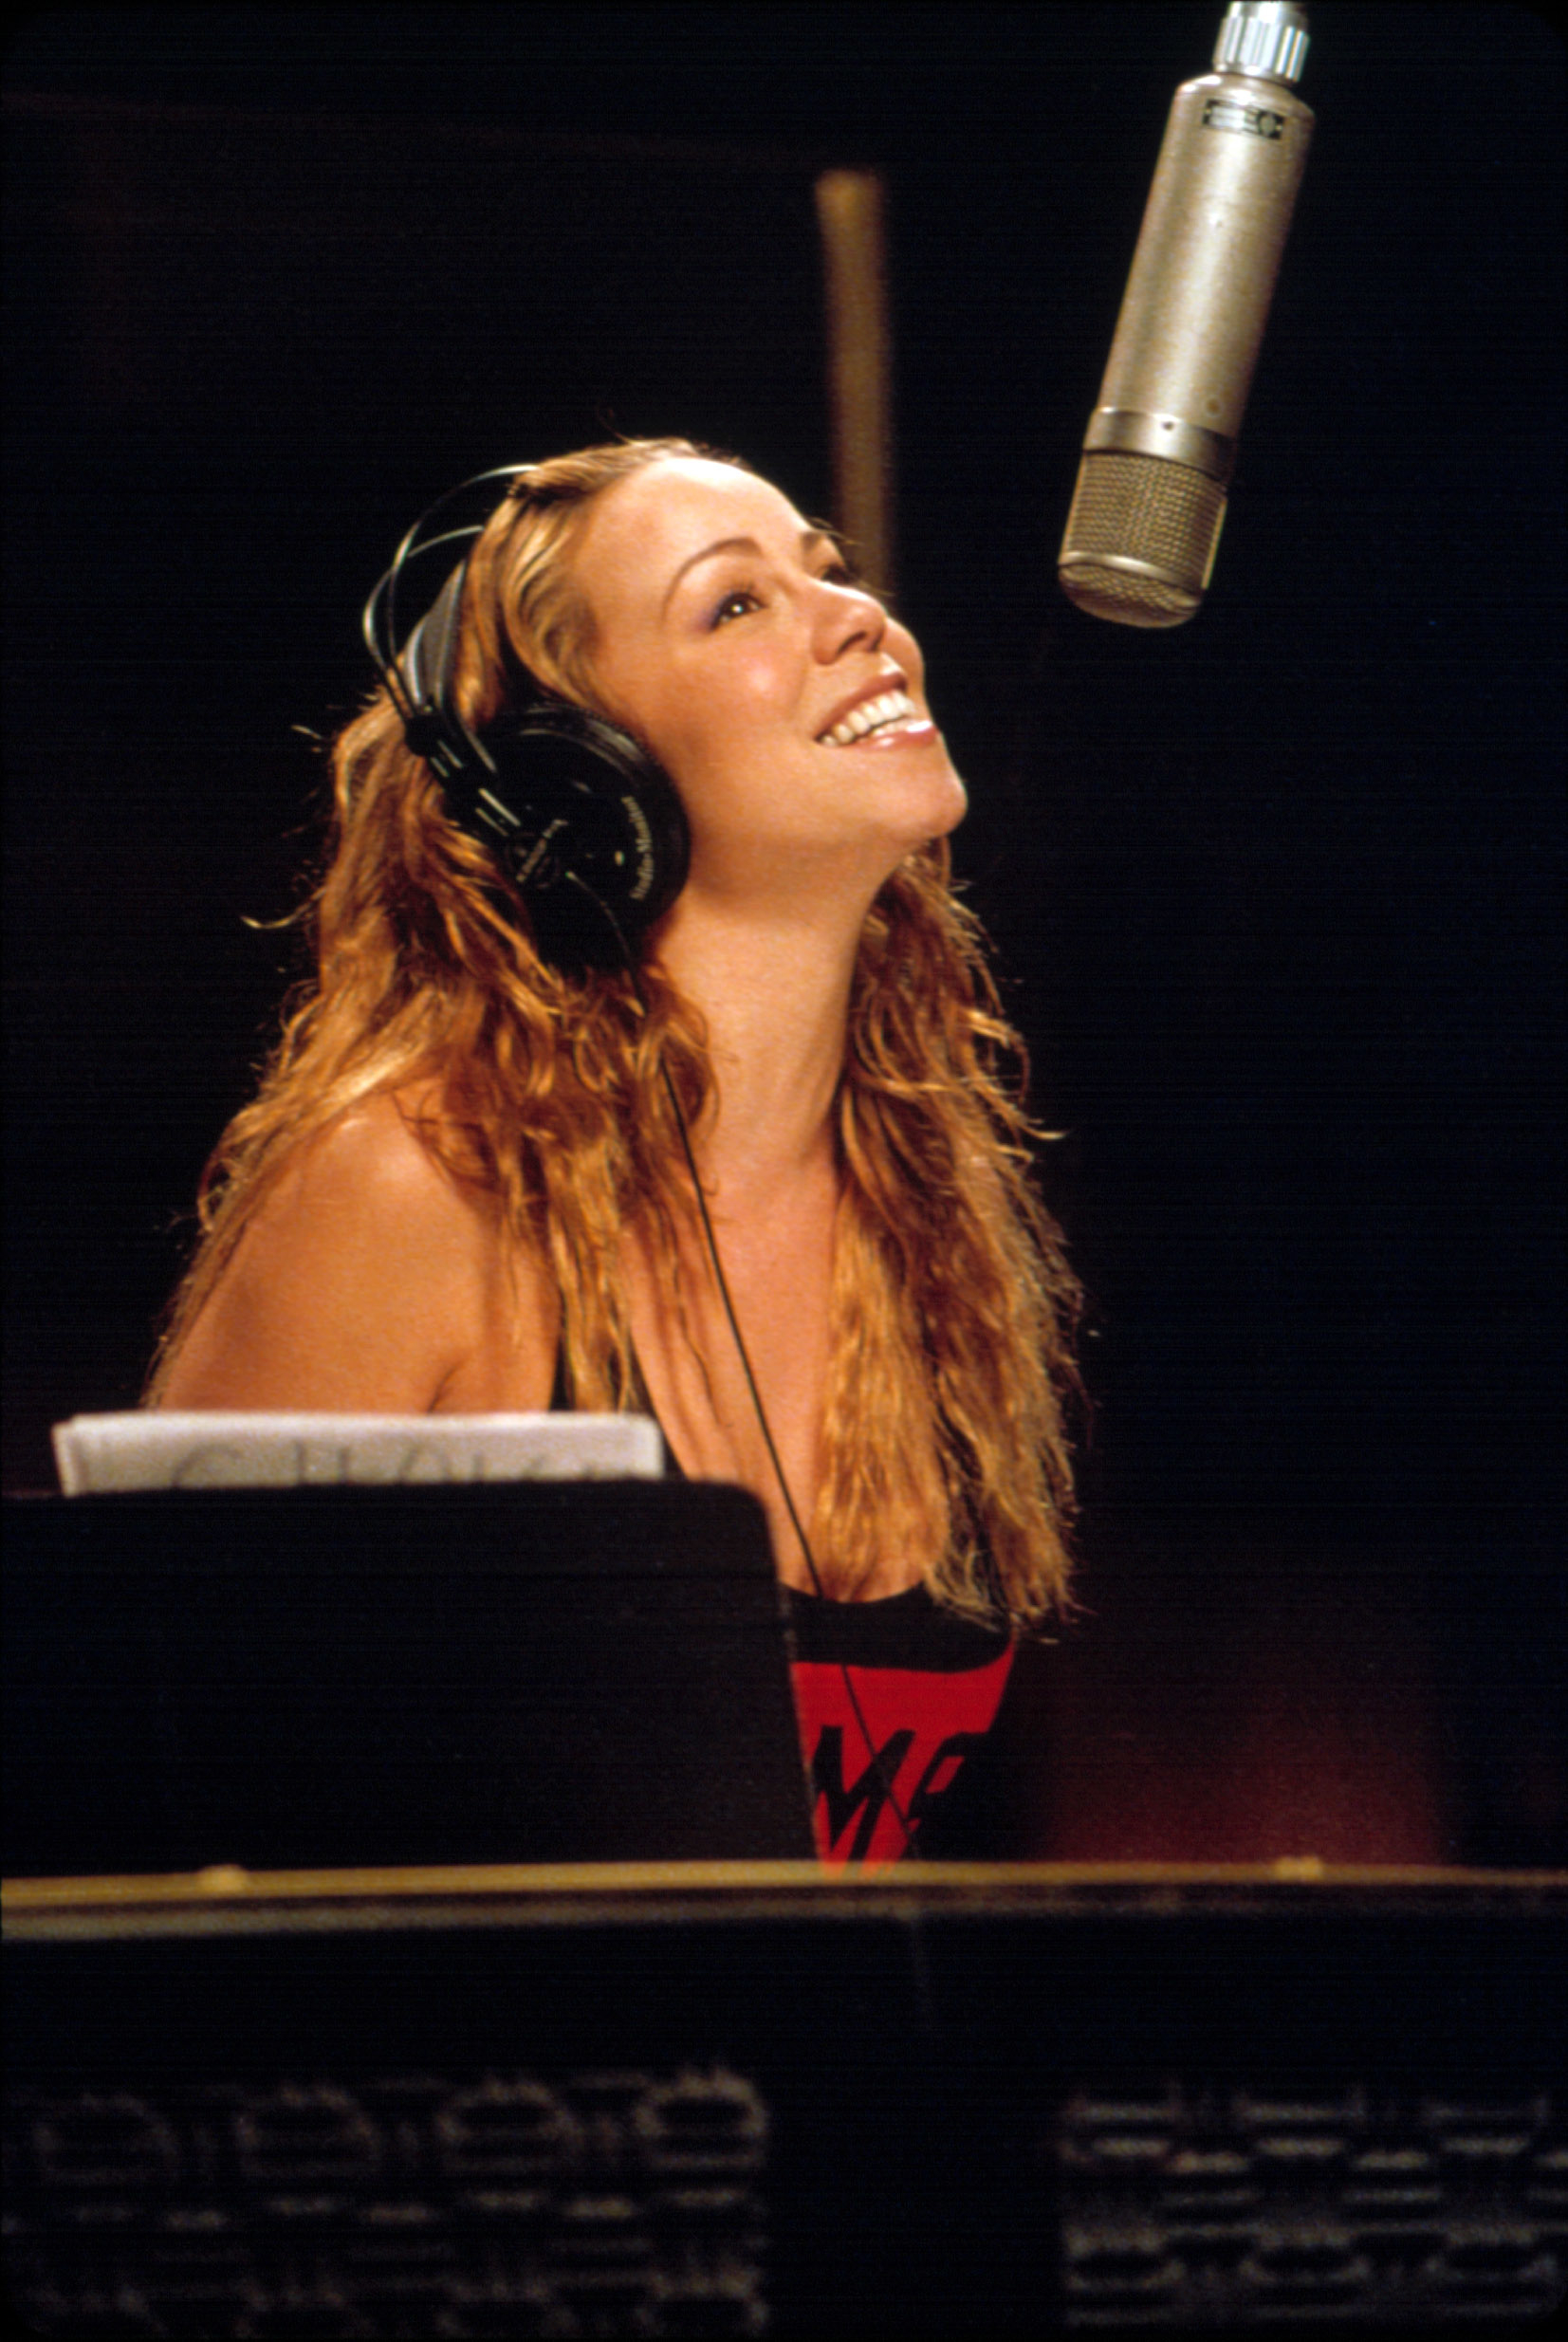 mariah singing in the recording booth